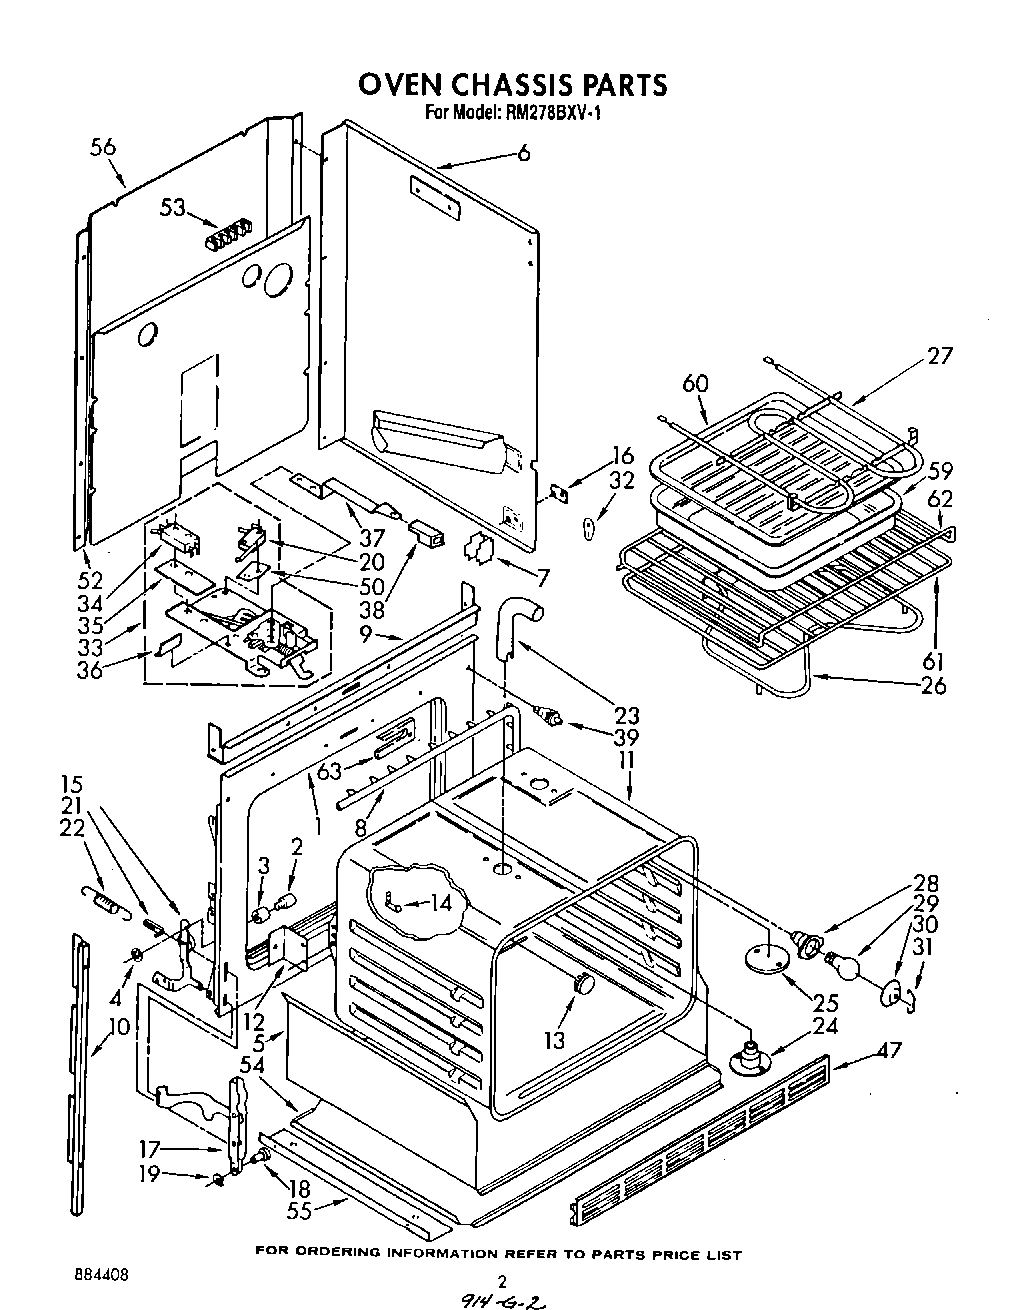 02 - OVEN CHASSIS